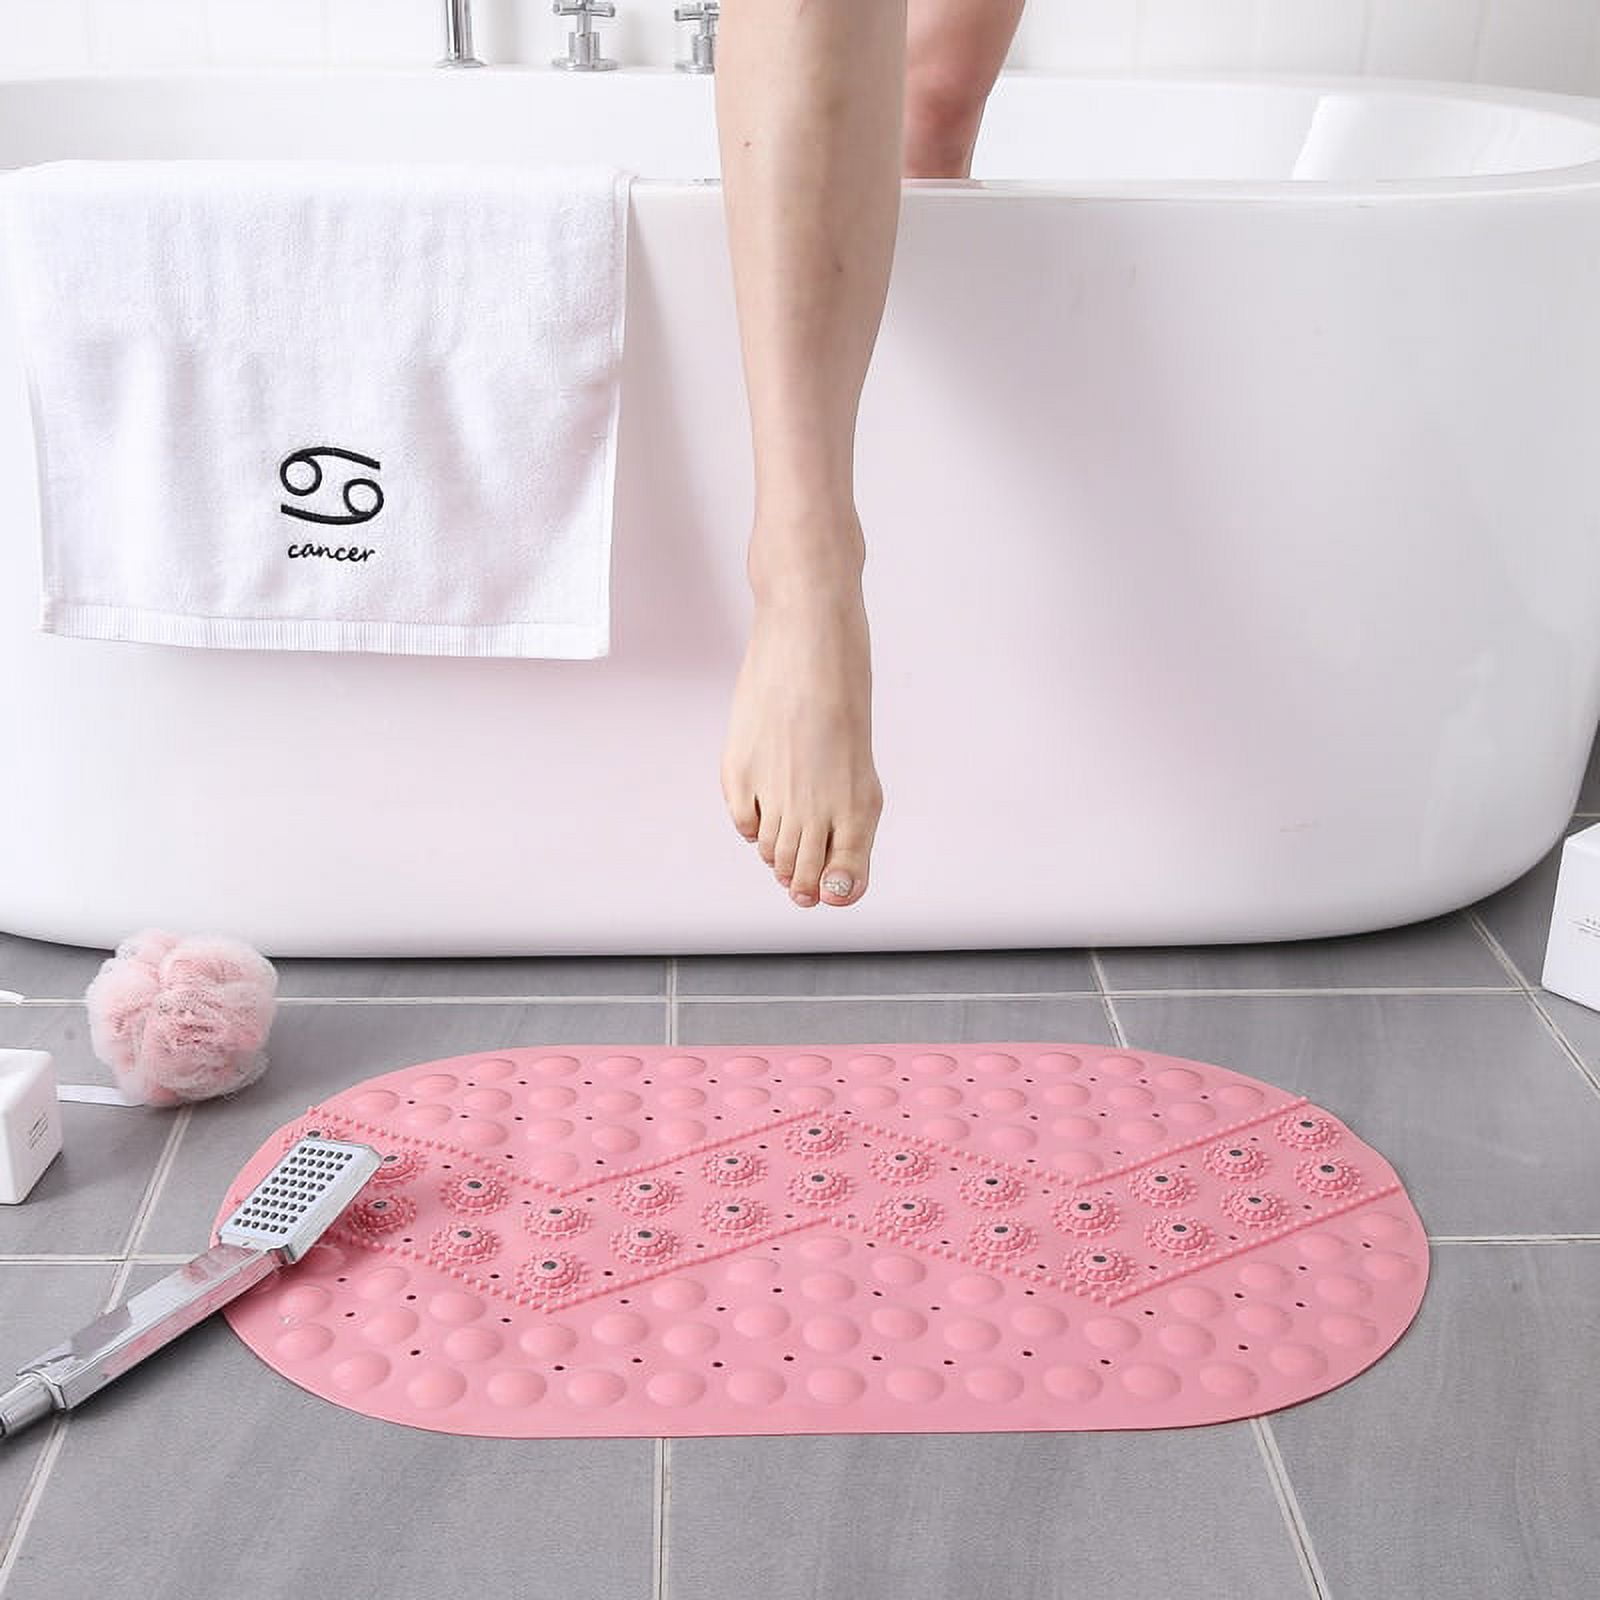 Stibadium Textured Surface Round Non Slip Shower Mat Anti Slip Bath Mats with Drain Hole in Middle for Shower Stall,Bathroom Floor,Showers 22 x 22 Inches Mint